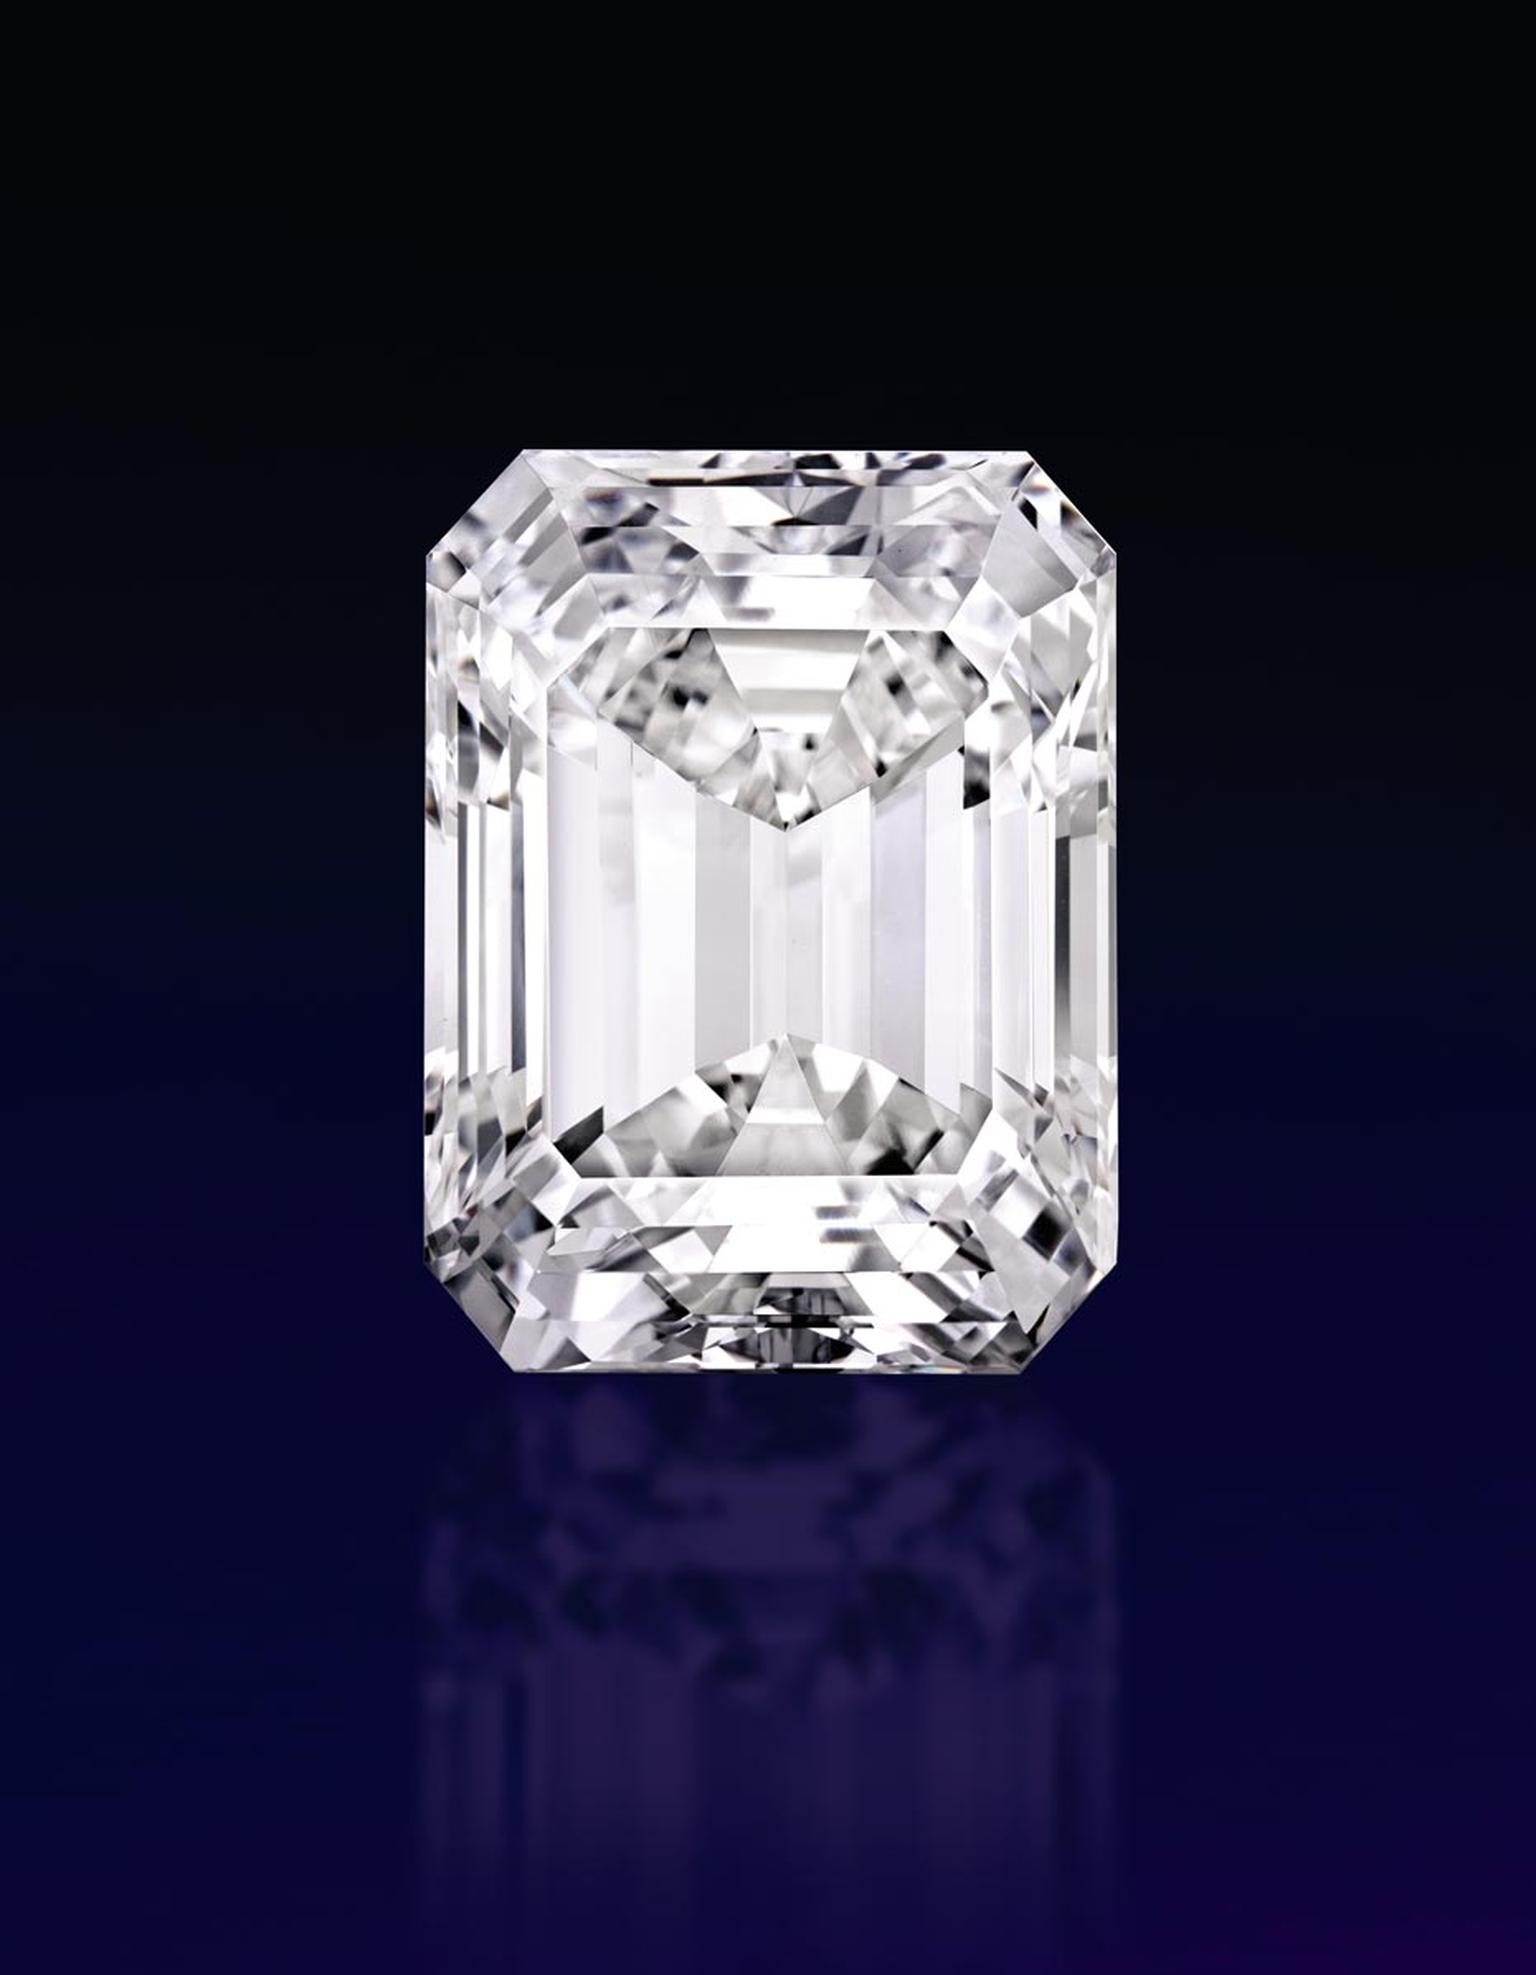 The extraordinary "perfect" 100.20ct emerald-cut diamond, which sold for $22.1million, was the highlight of the Sotheby's Magnificent Jewels Sale in New York on April 21, which achieved a record-breaking total of $65.1 million.